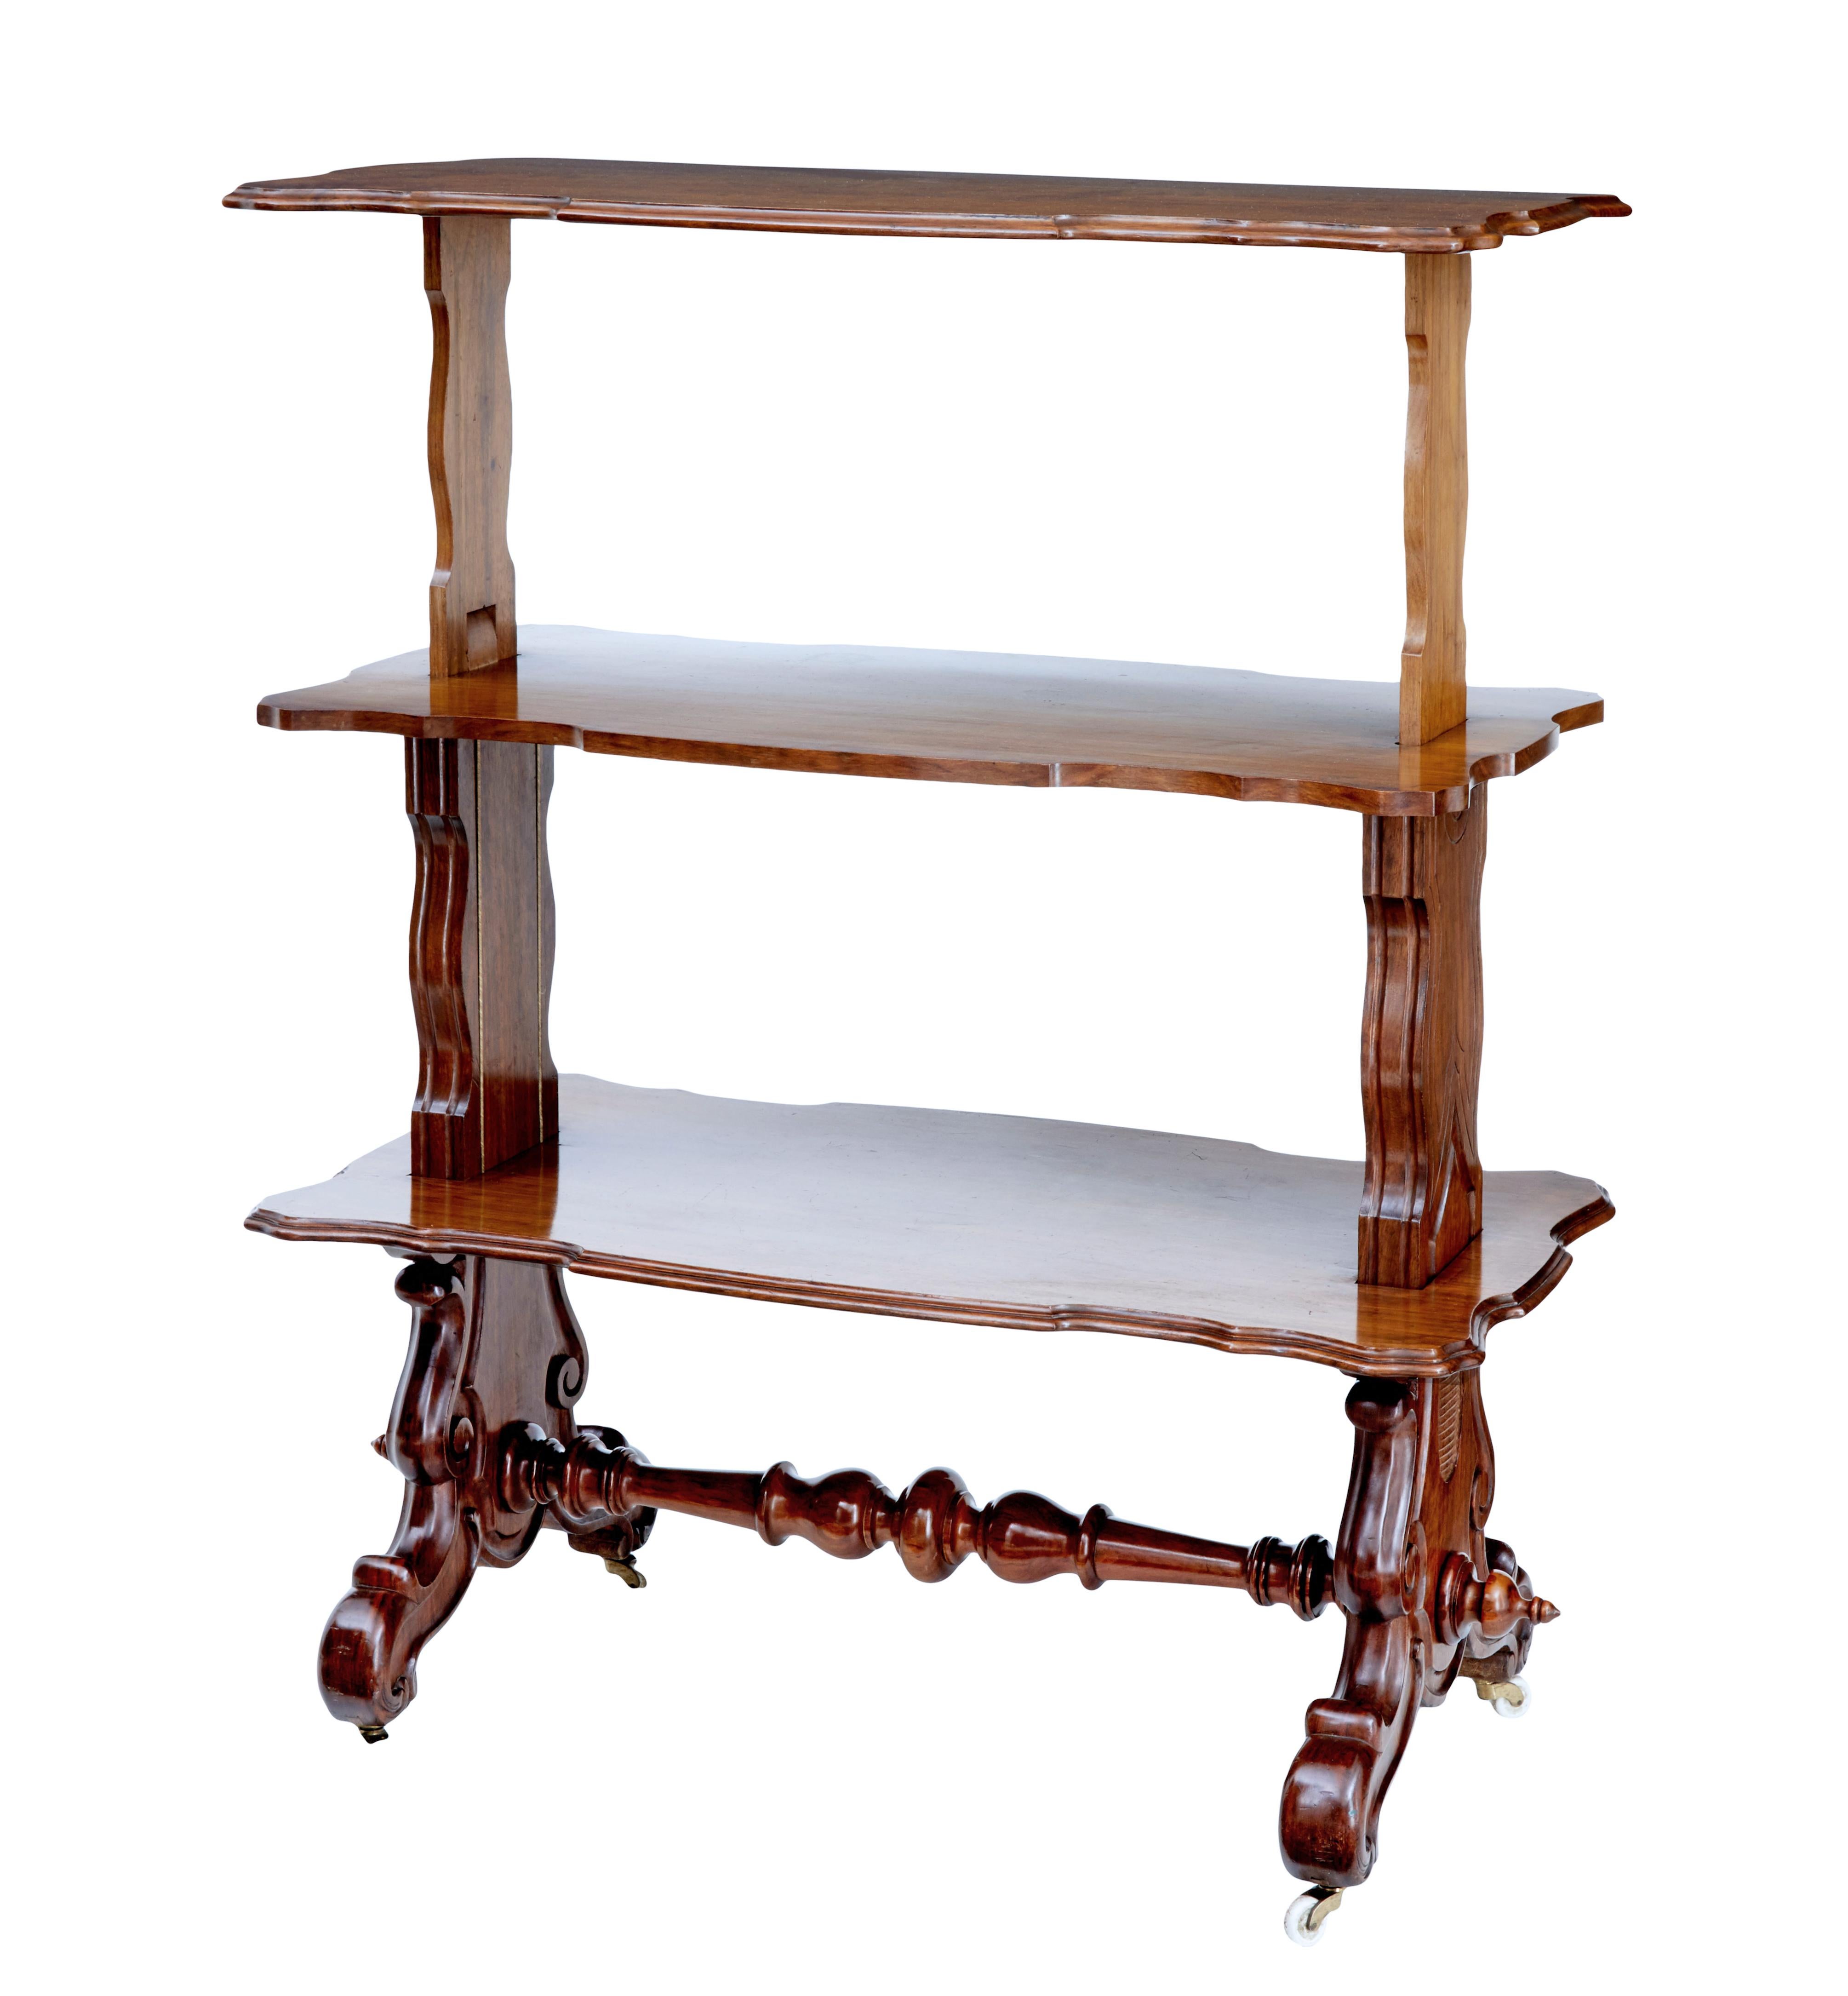 19th century Victorian walnut metamorphic dumb waiter, circa 1880.

Rectangular top with shaped decorative edging. Top rises up to form 3 serving surfaces. Carved trestle ends, united by turned stretcher.

Standing on ceramic castors.

Minor